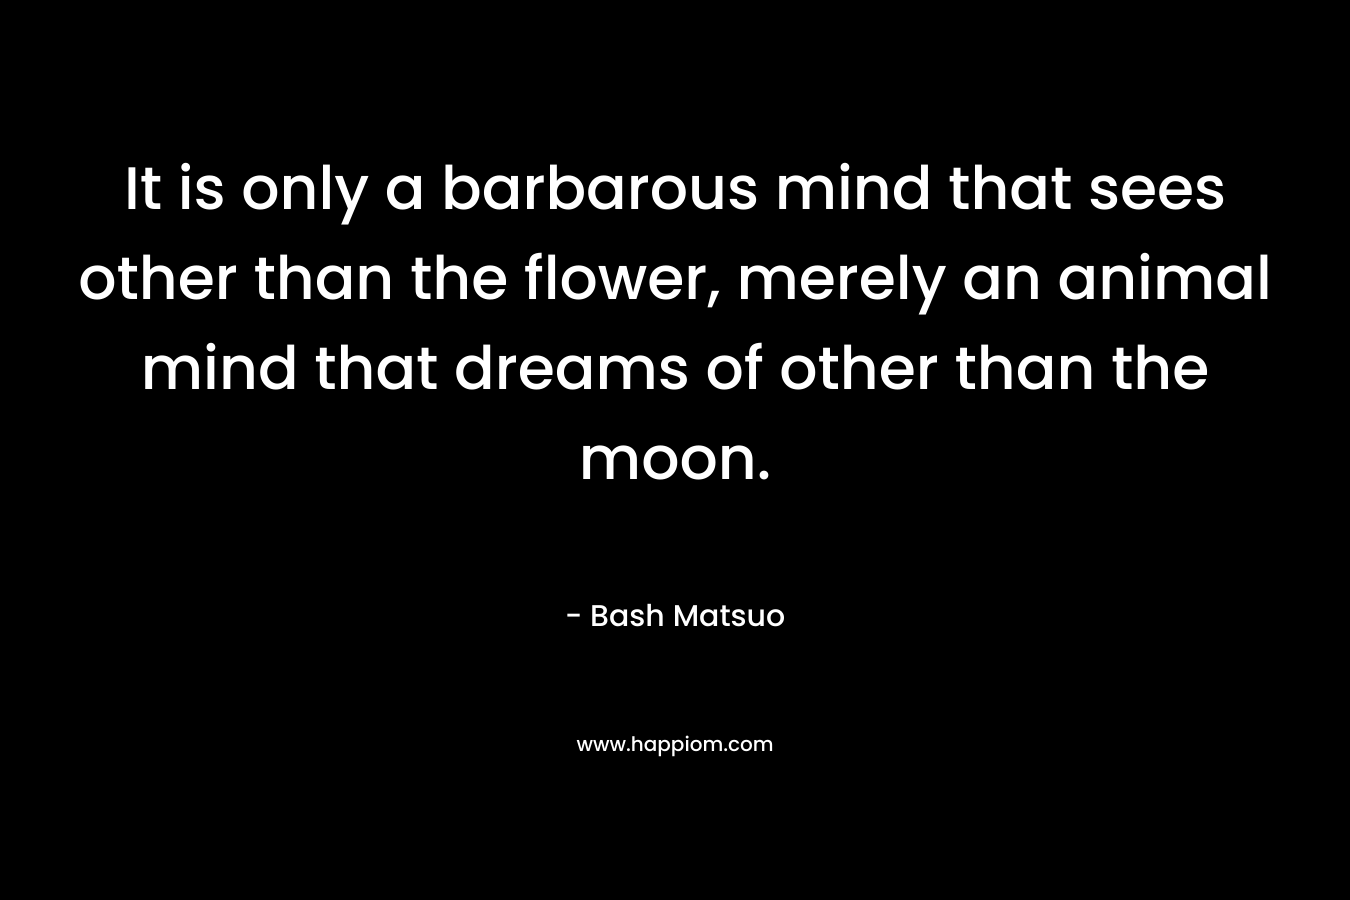 It is only a barbarous mind that sees other than the flower, merely an animal mind that dreams of other than the moon. – Bash Matsuo